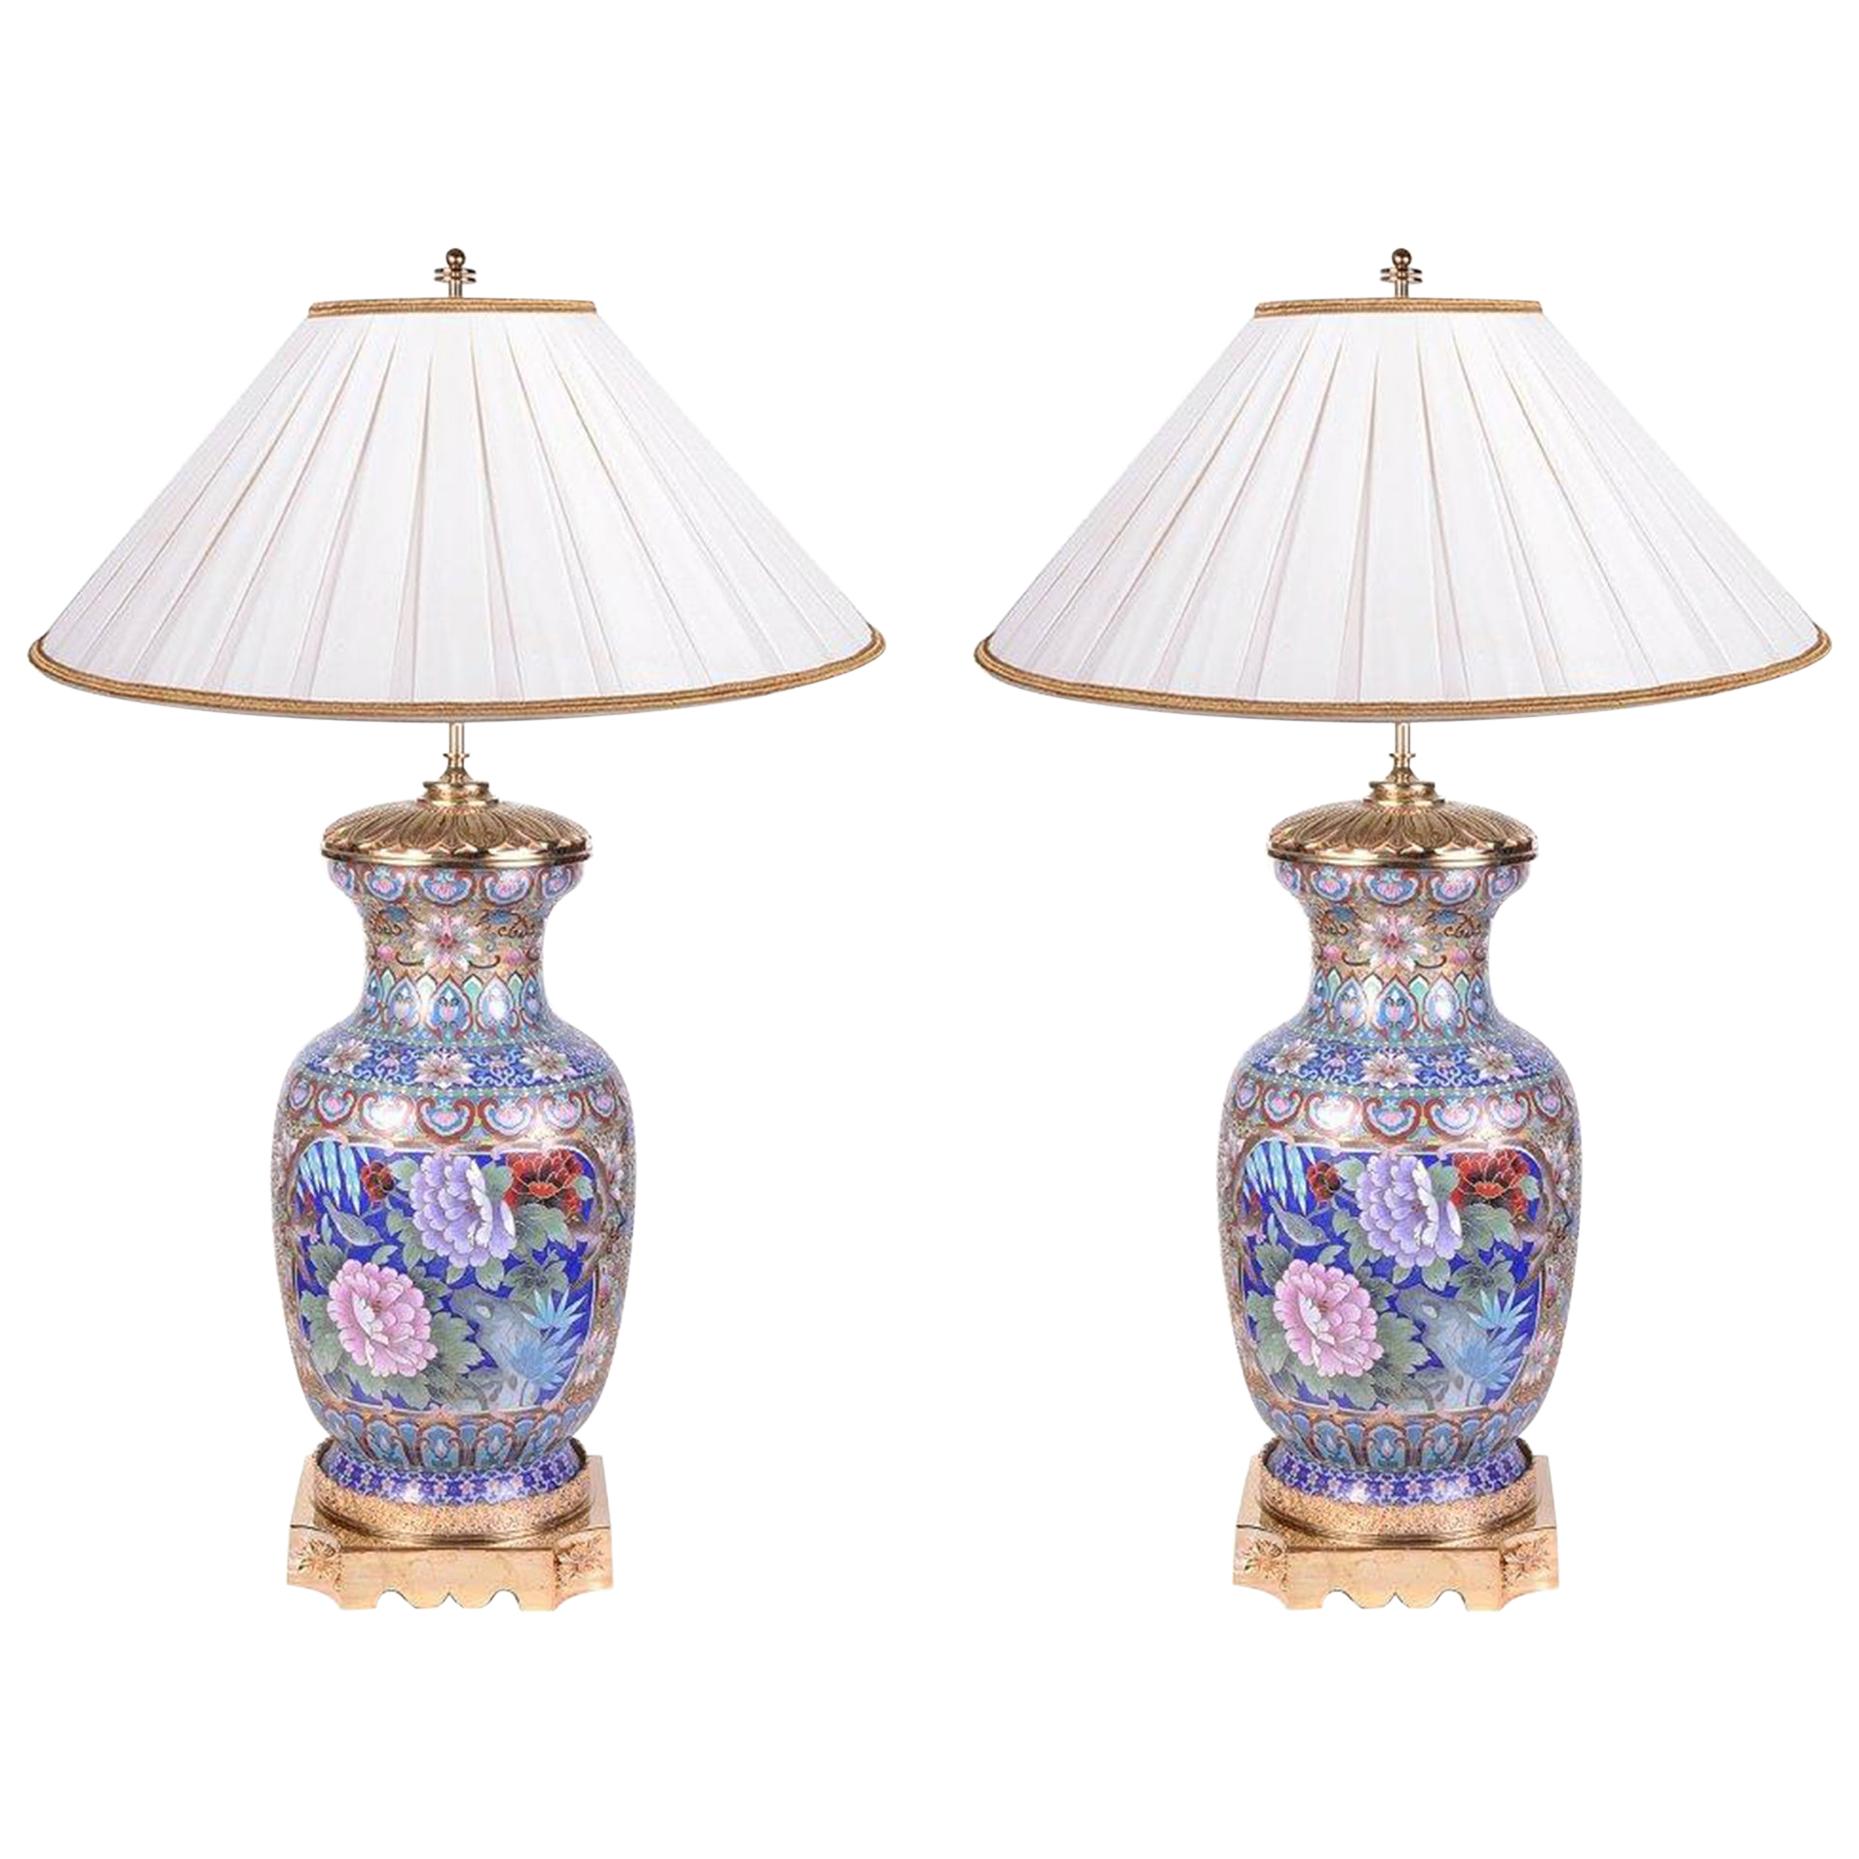 Pair of Early 20th Century Chinese Cloisonne Enamel Vases/Lamps